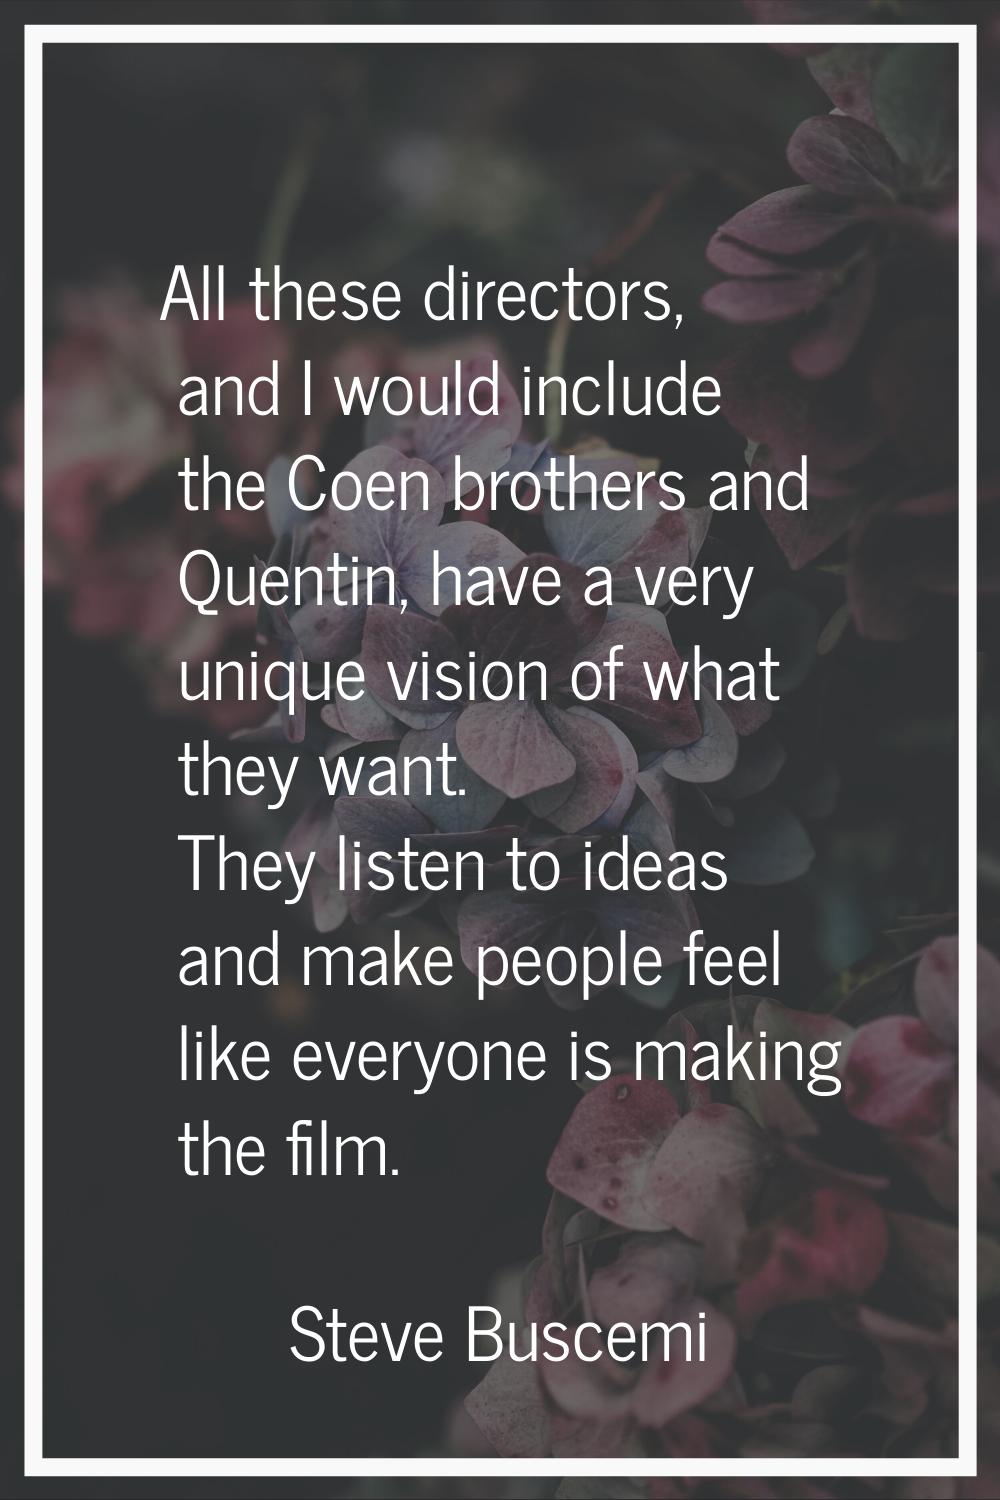 All these directors, and I would include the Coen brothers and Quentin, have a very unique vision o